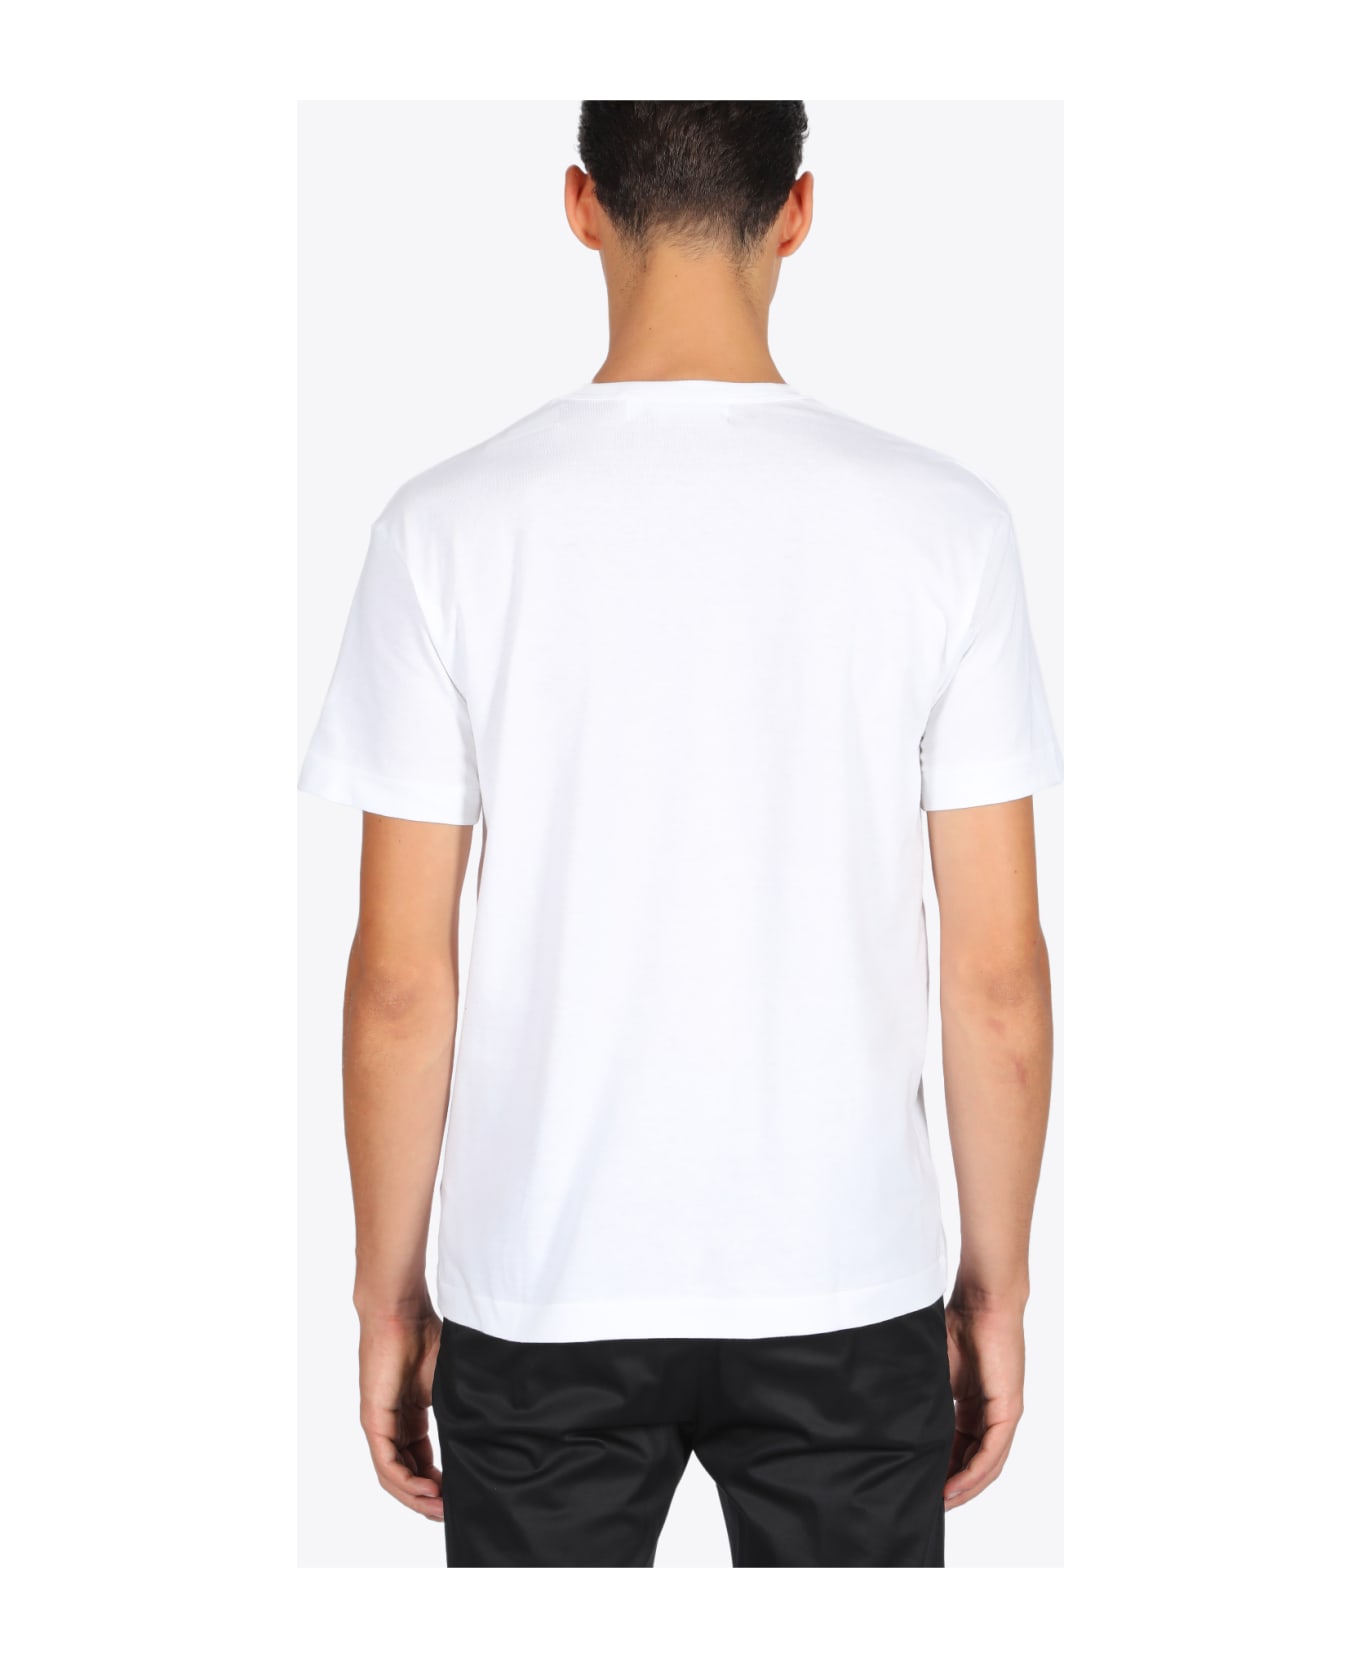 Comme des Garçons Play Small Heart Patch T-shirt White cotton t-shirt with small heart - Bianco